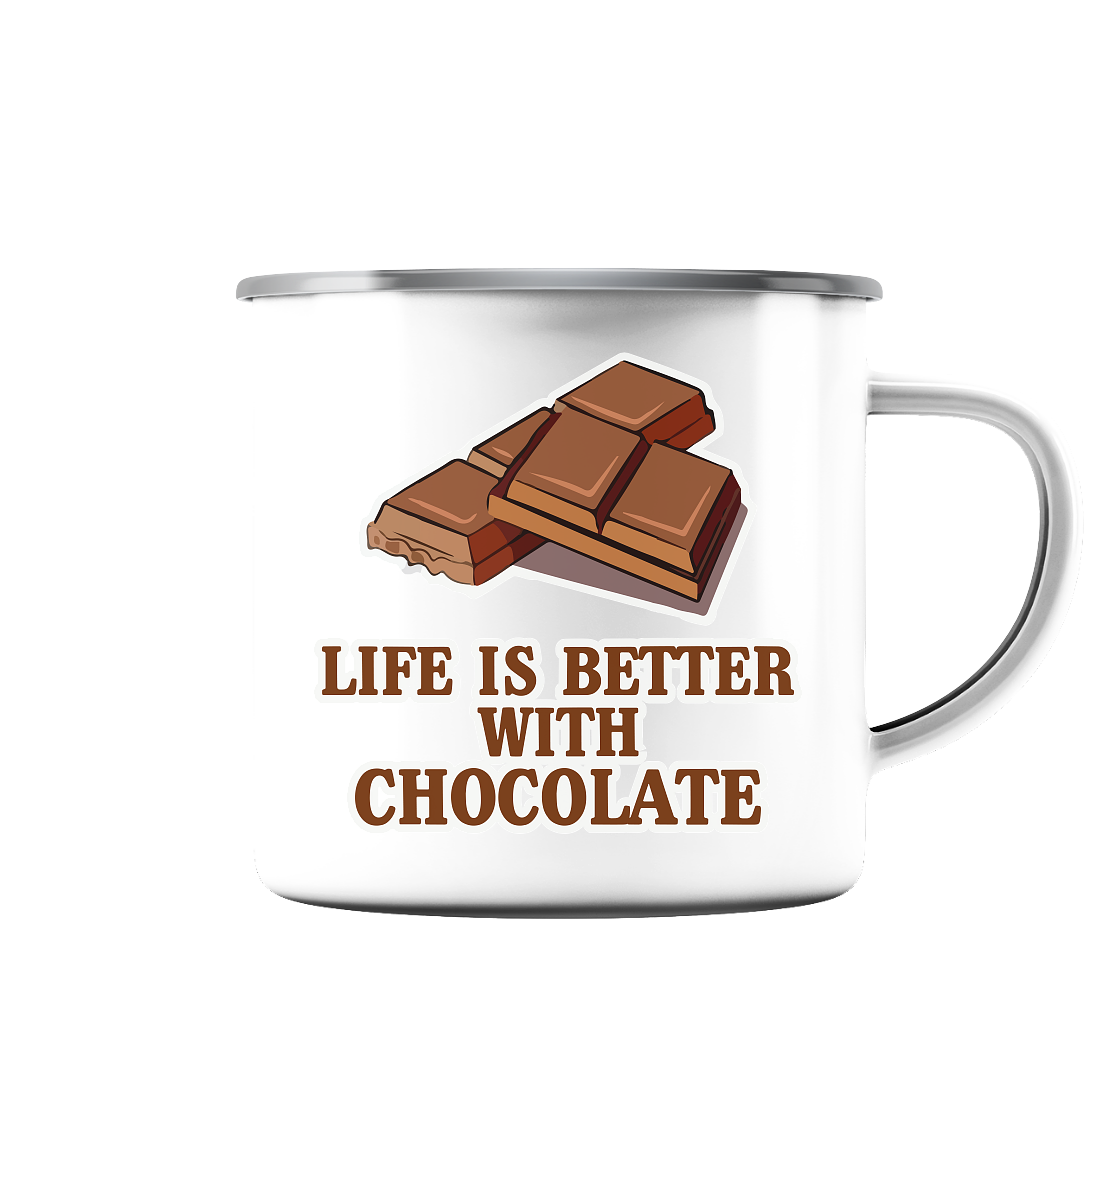 Life is better with chocolate - Emaille Tasse (Silber)